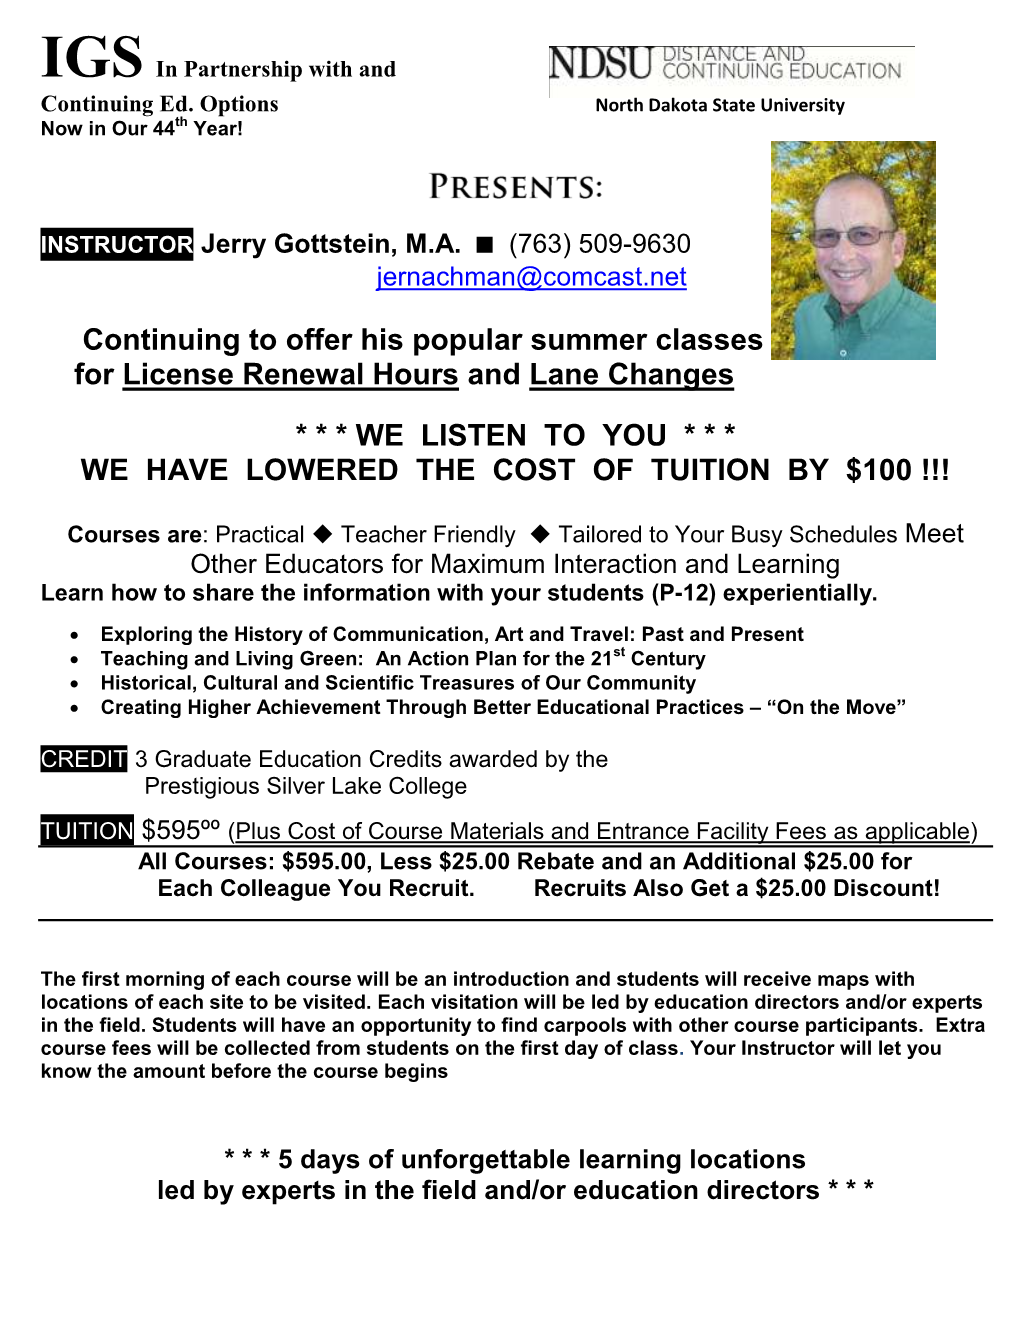 Continuing to Offer His Popular Summer Classes for License Renewal Hours and Lane Changes